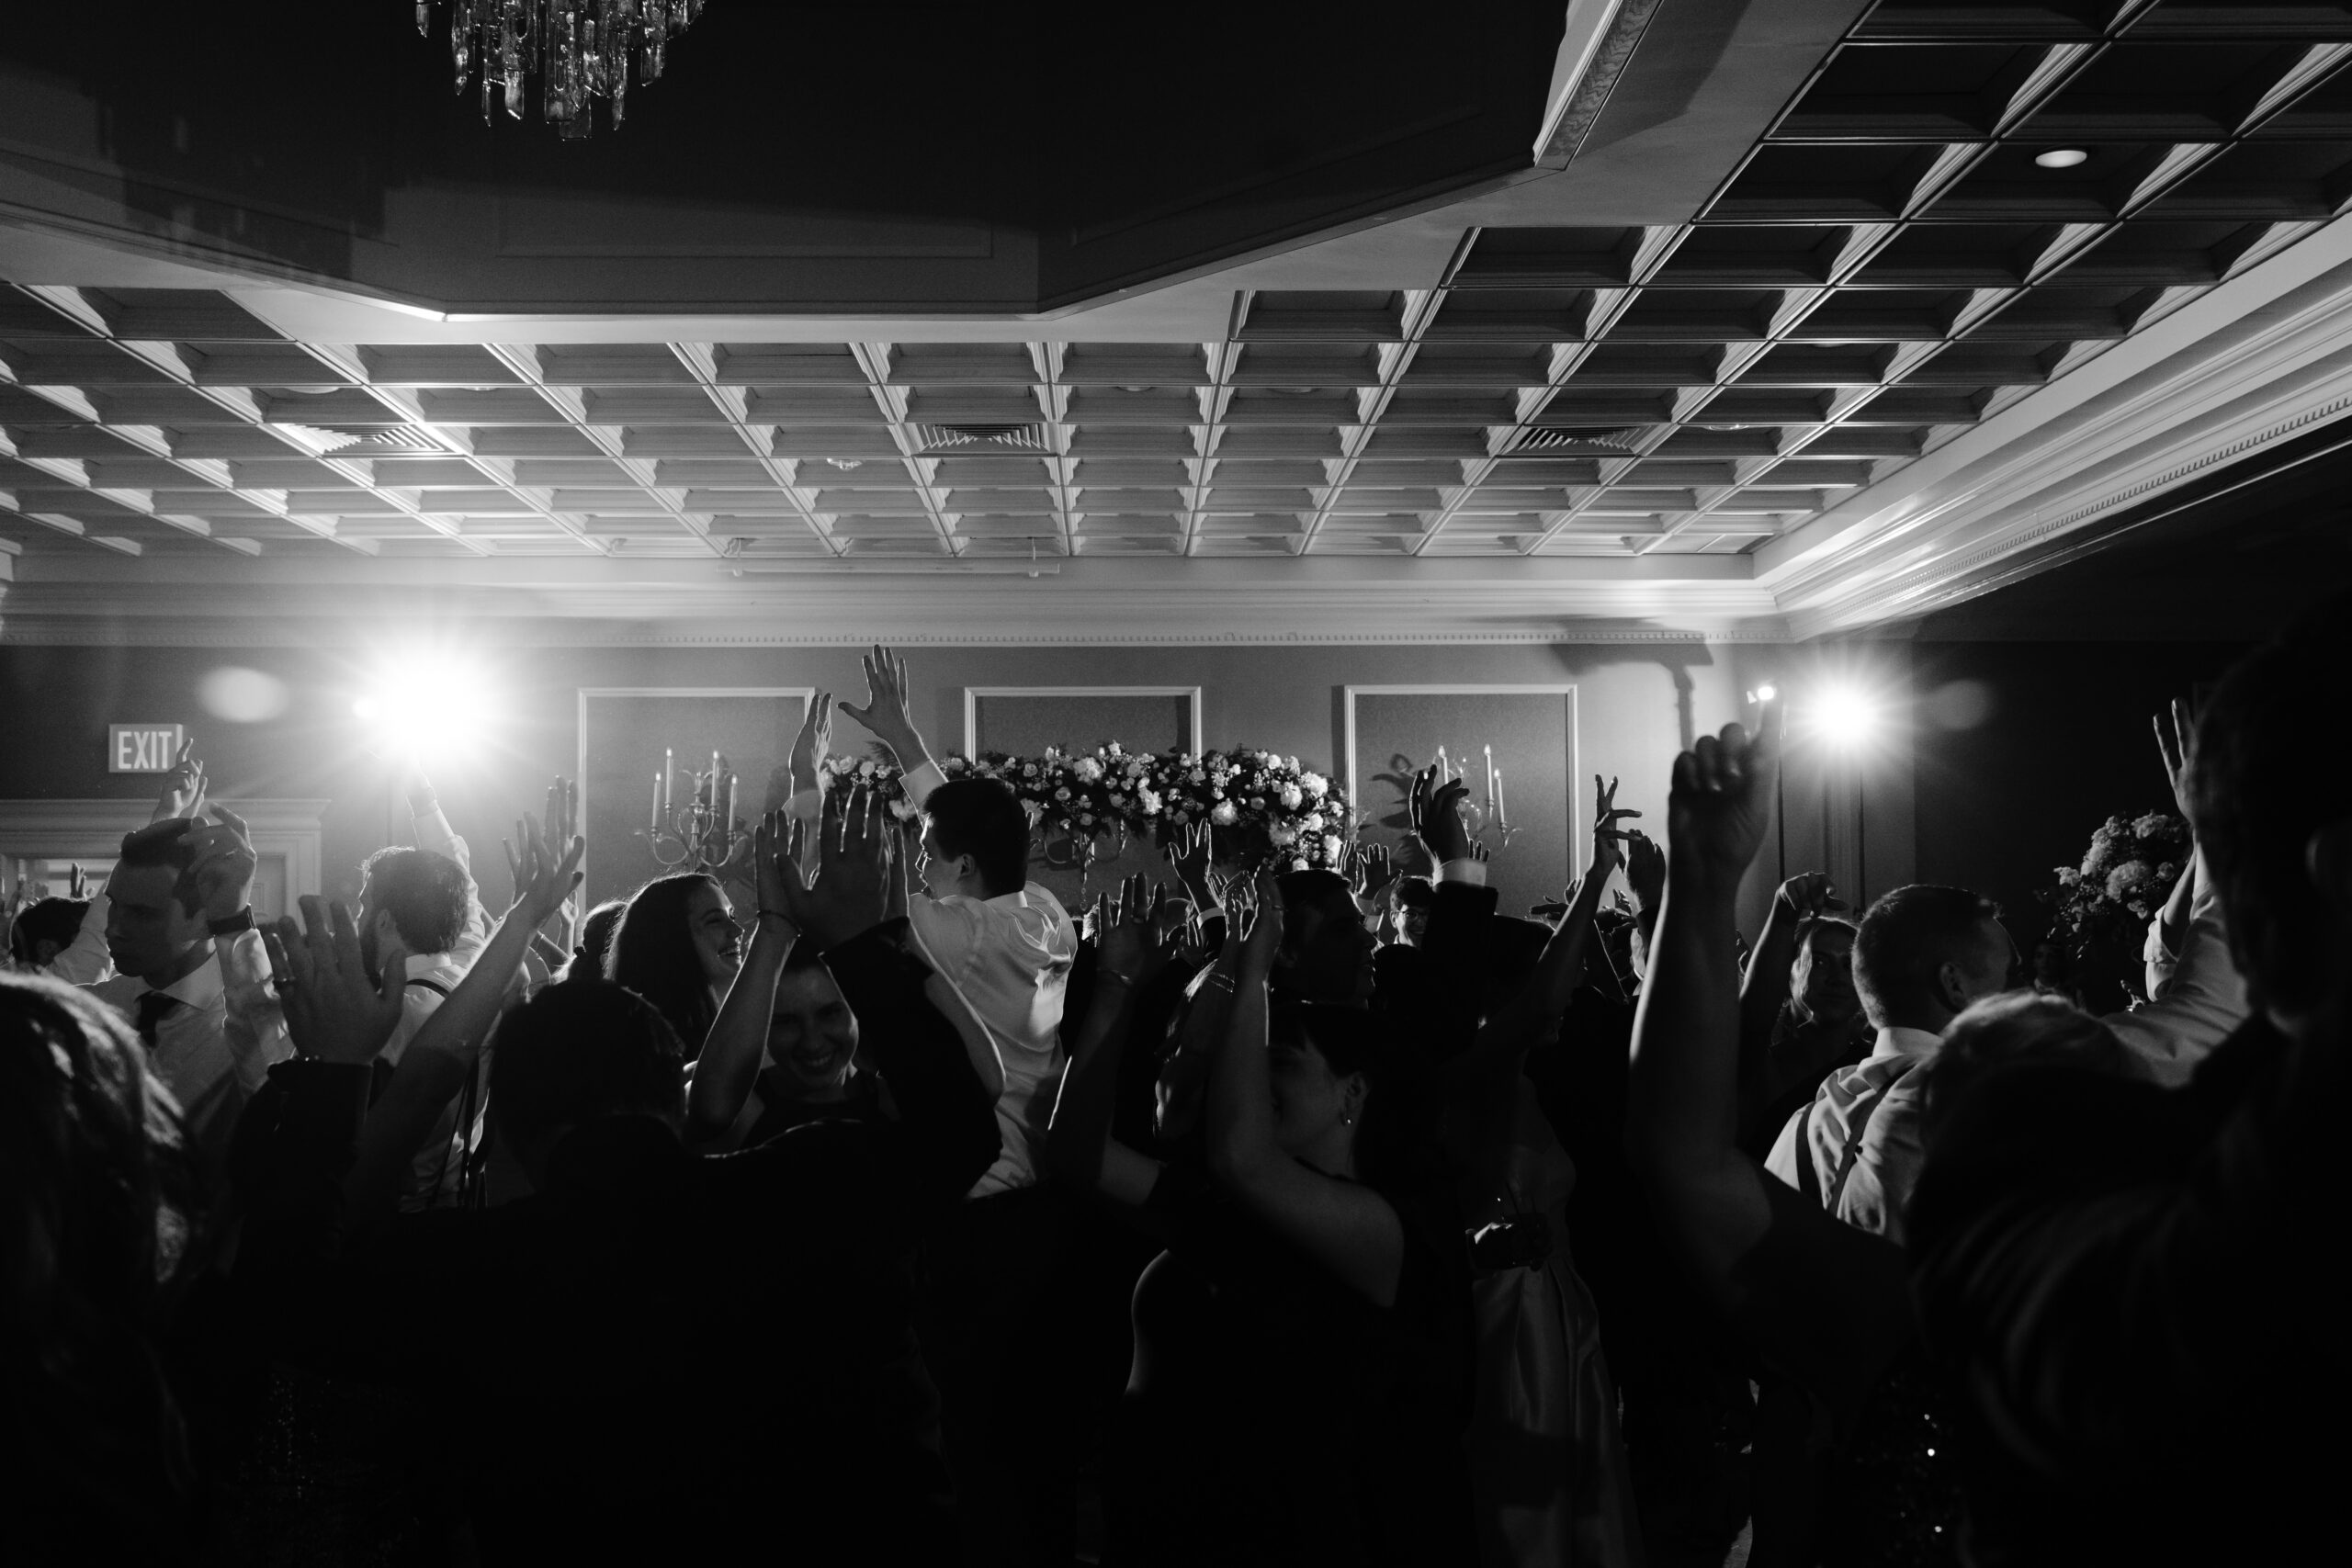 black and white edit of a group of people dancing with their hands in the air. Spotlights are shining behind them.